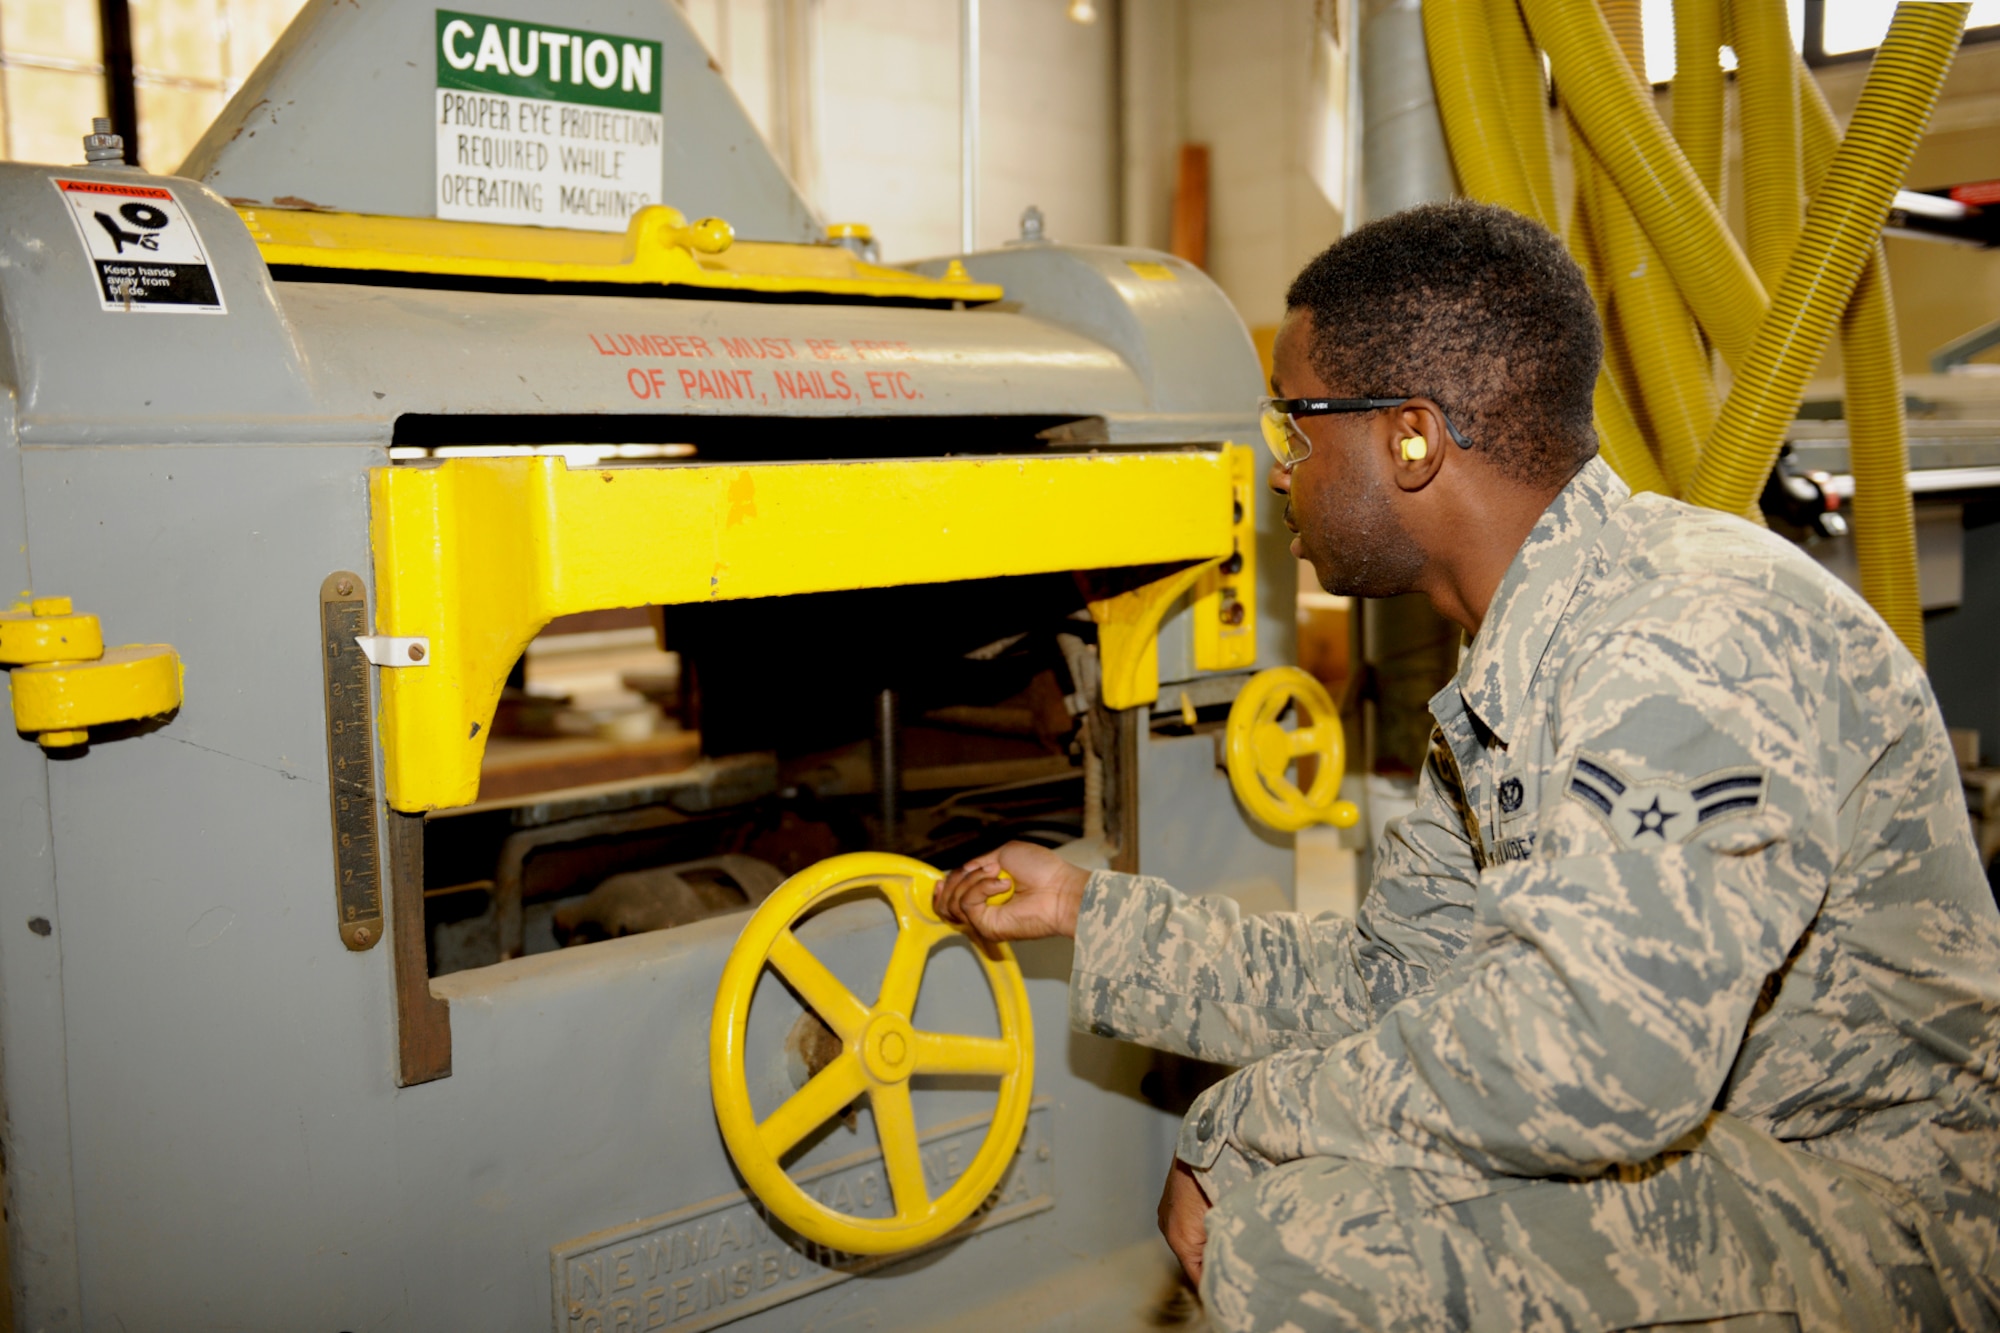 151017-Z-EZ686-021 – Airman 1st Class John Pitts of the 127th Civil Engineering Squadron, Selfridge Mich., is making adjustment on the work shop planer, used for resurfacing wood at Selfridge Air National Guard Base Mich., October 17, 2015.  Pitts is a newly affiliated member of the CE Squadron, who recently graduated from technician school where he learned the art of working on buildings and structures.  (U.S. Air National Guard photo by MSgt. David Kujawa/Released)